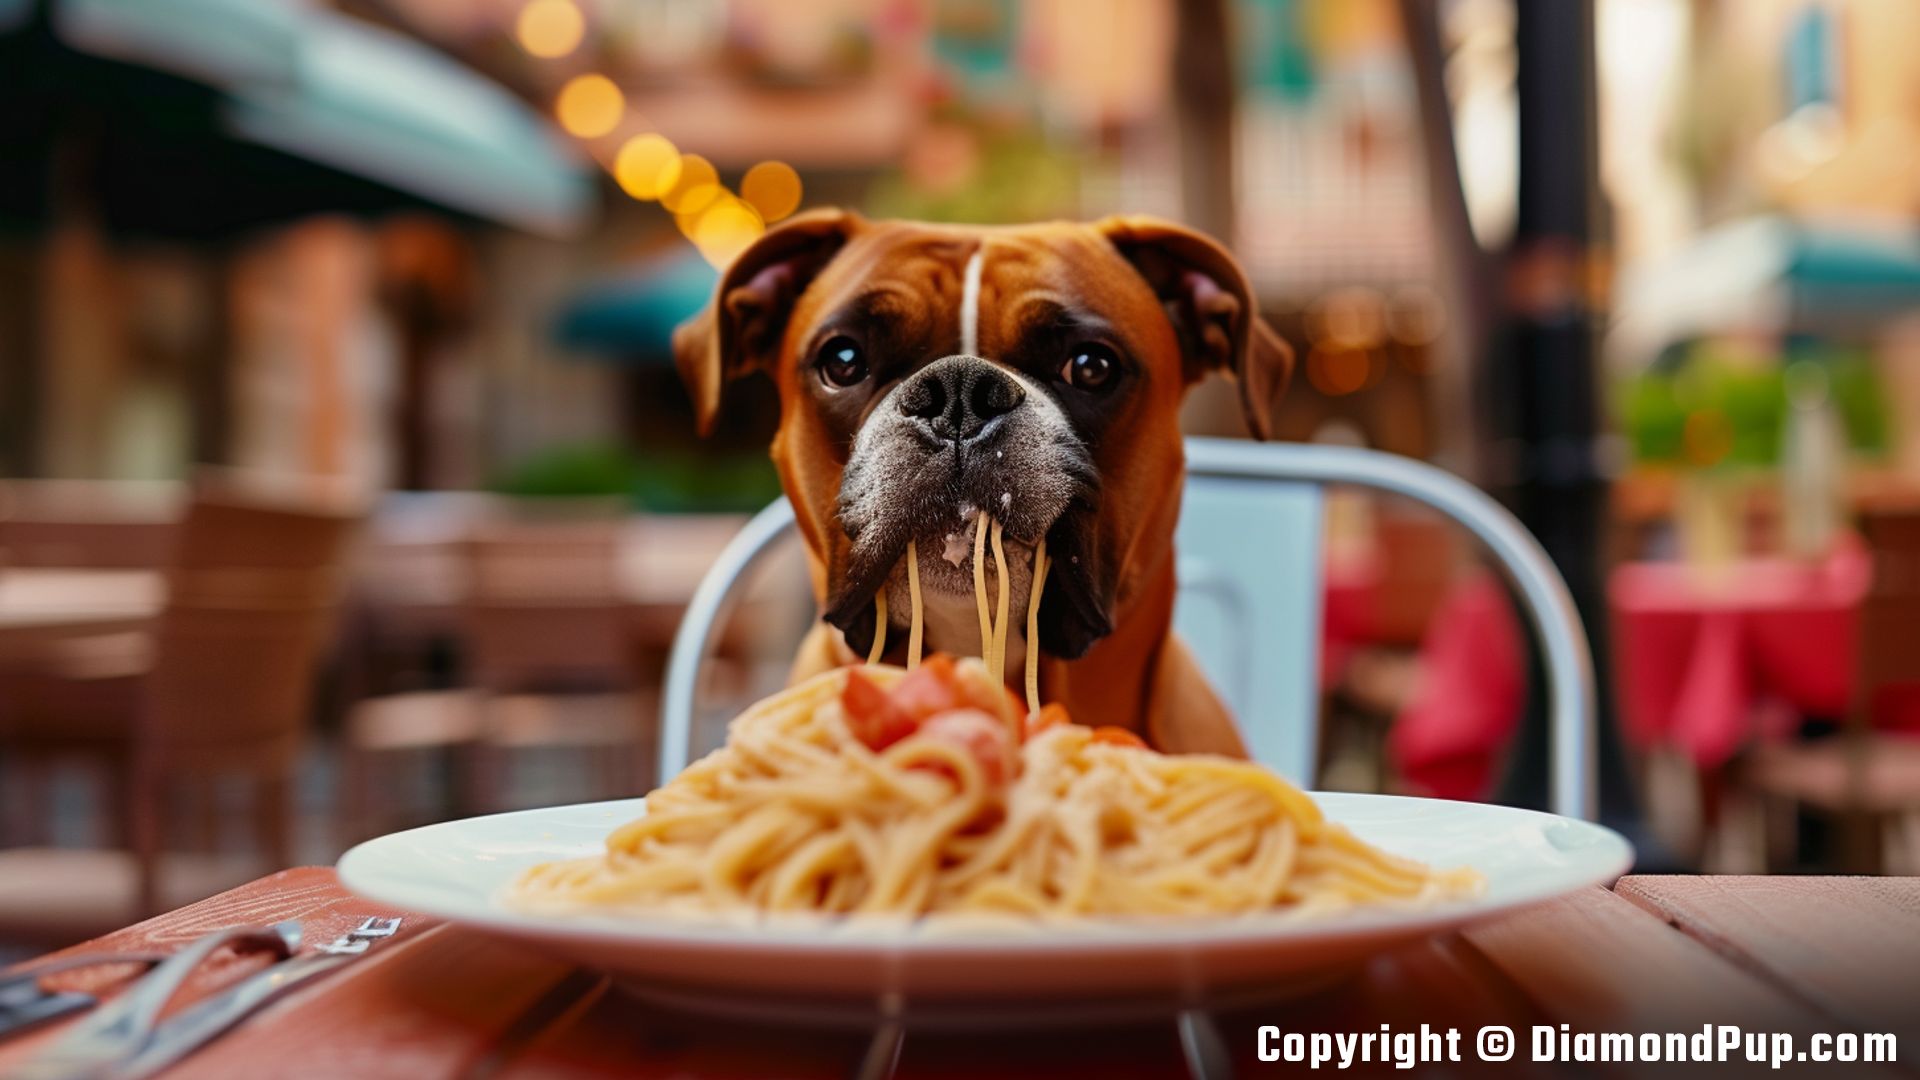 Photograph of a Playful Boxer Snacking on Pasta